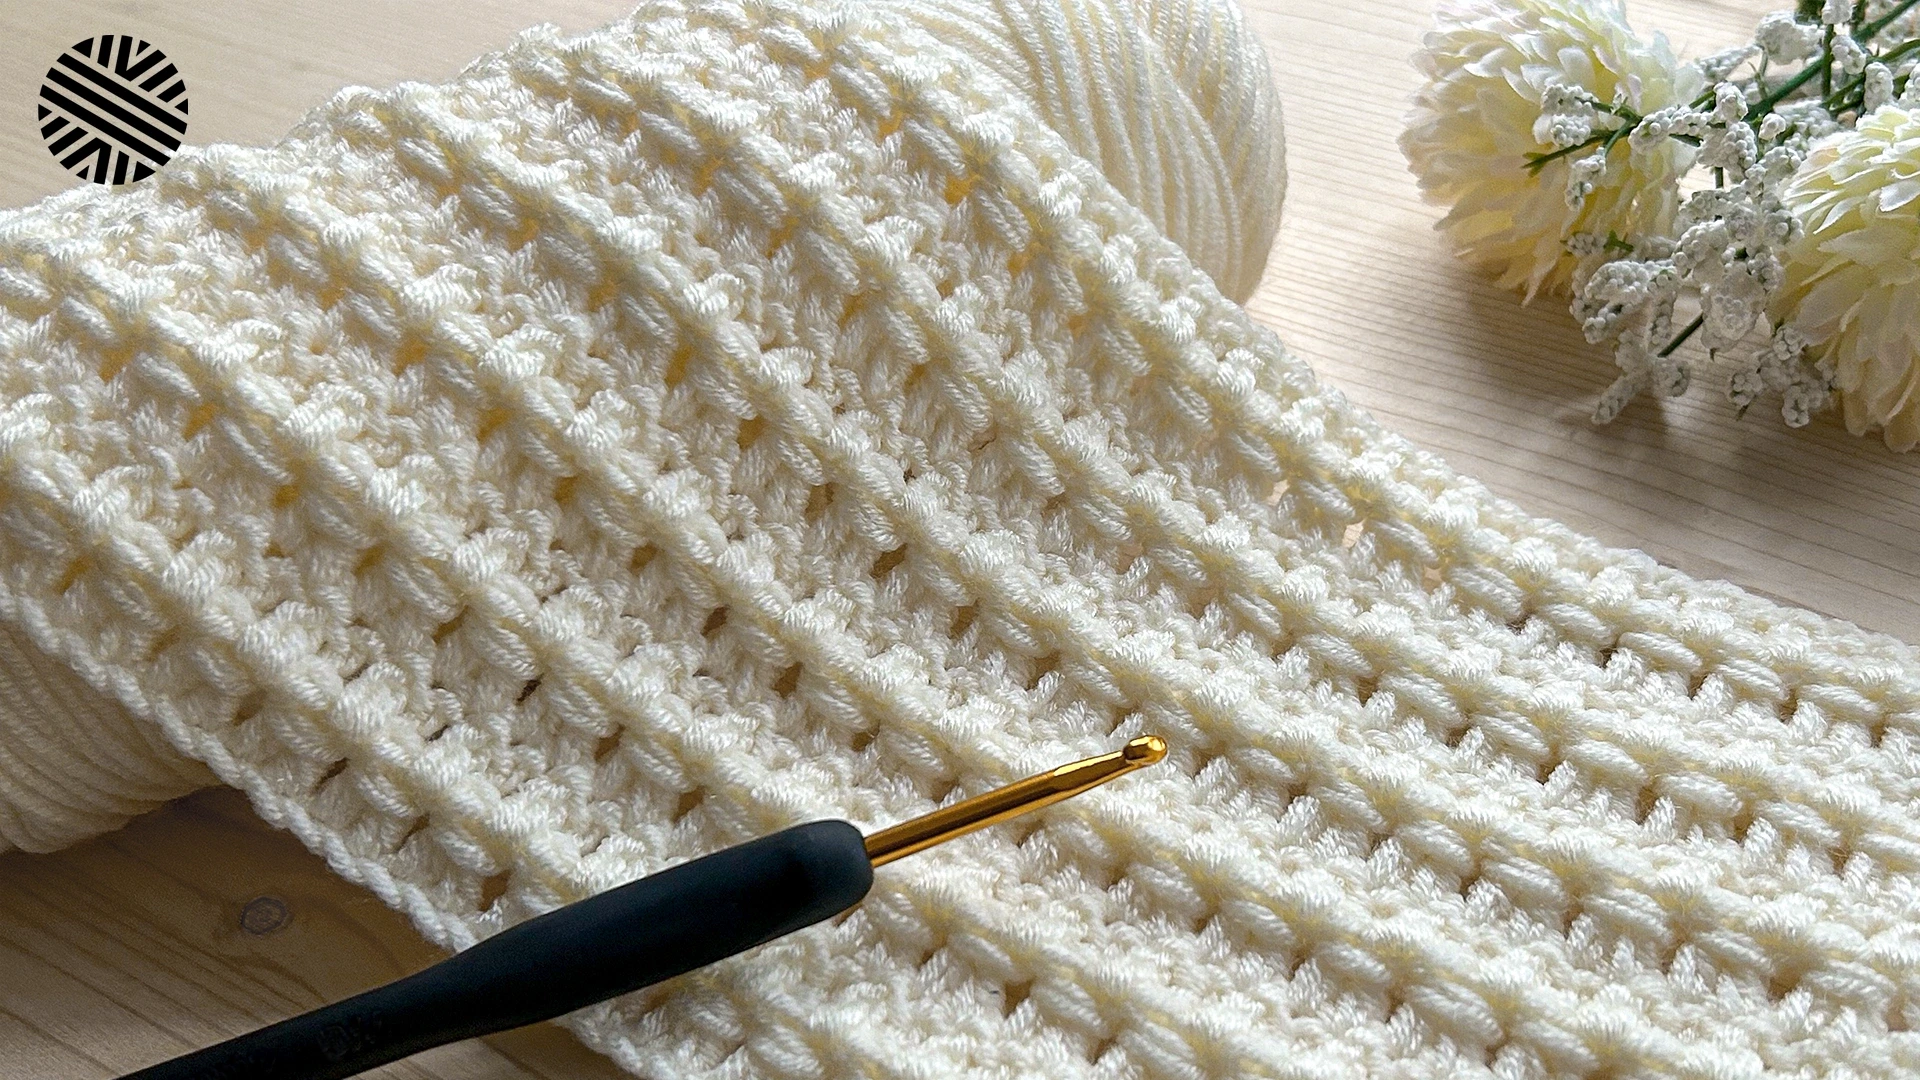 Fast and Easy Blanket: How Much Yarn Do You Need? 